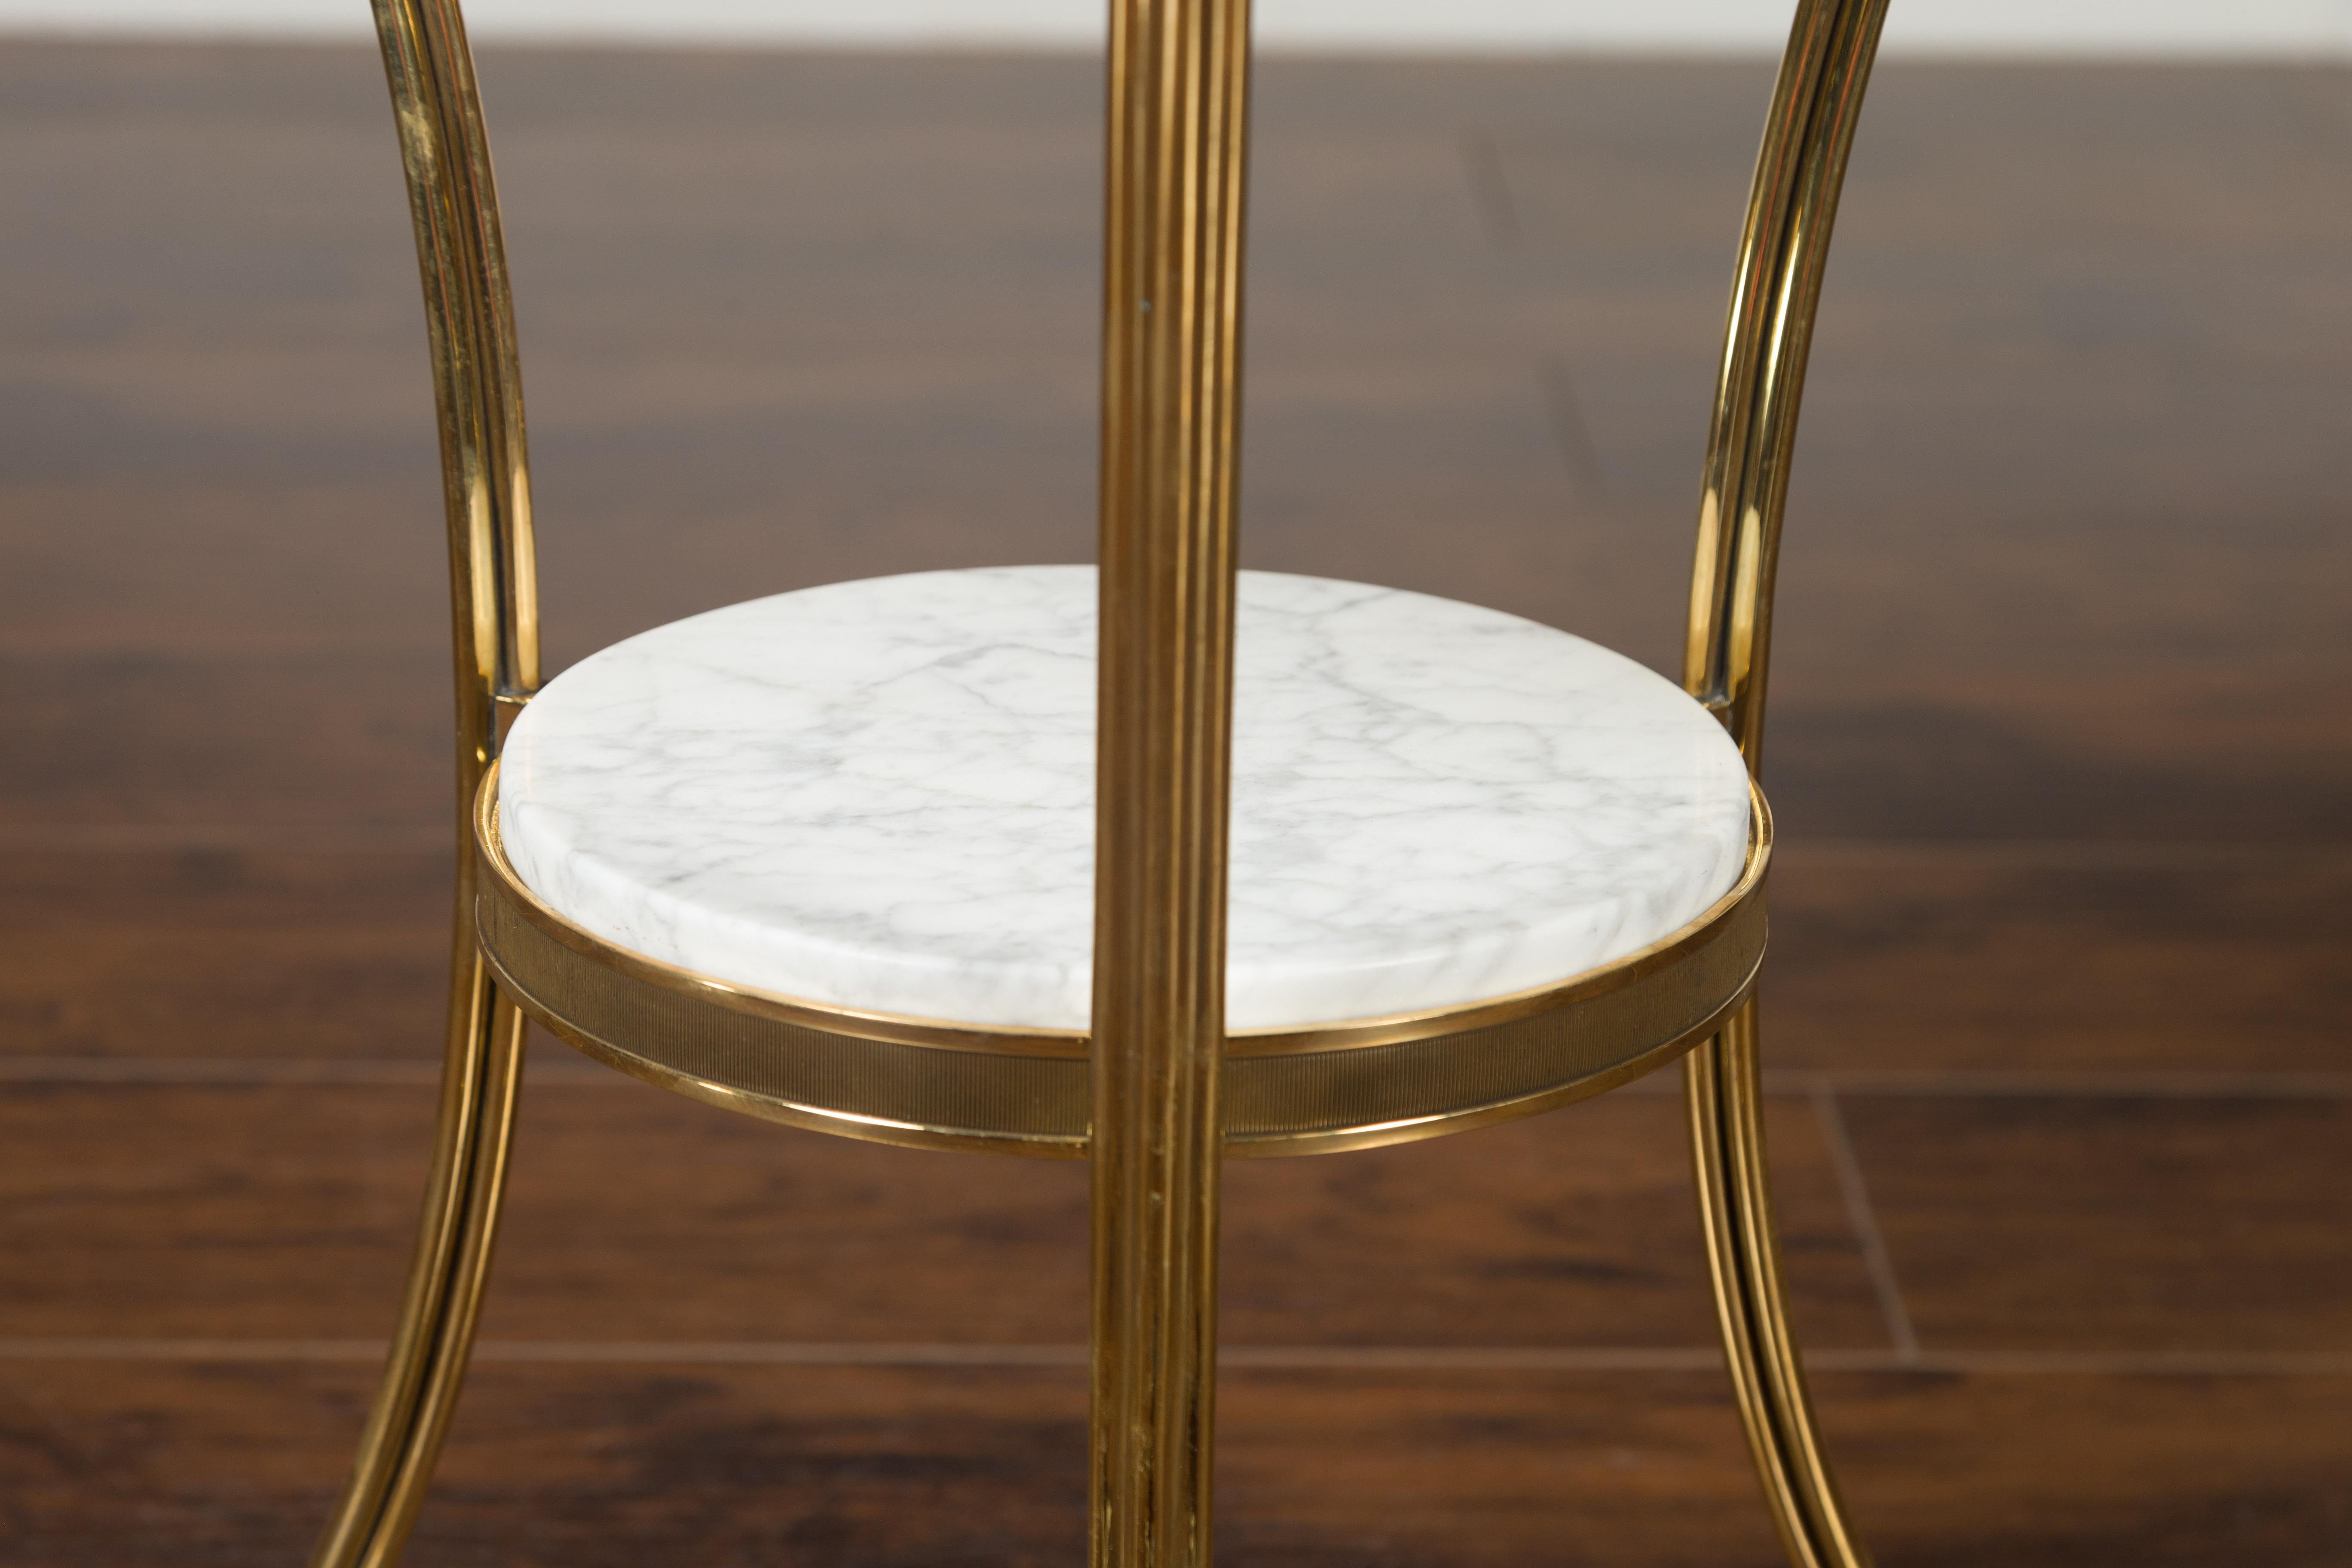 Midcentury Italian Brass Table with Round White Marble Top and Scrolling Legs 1